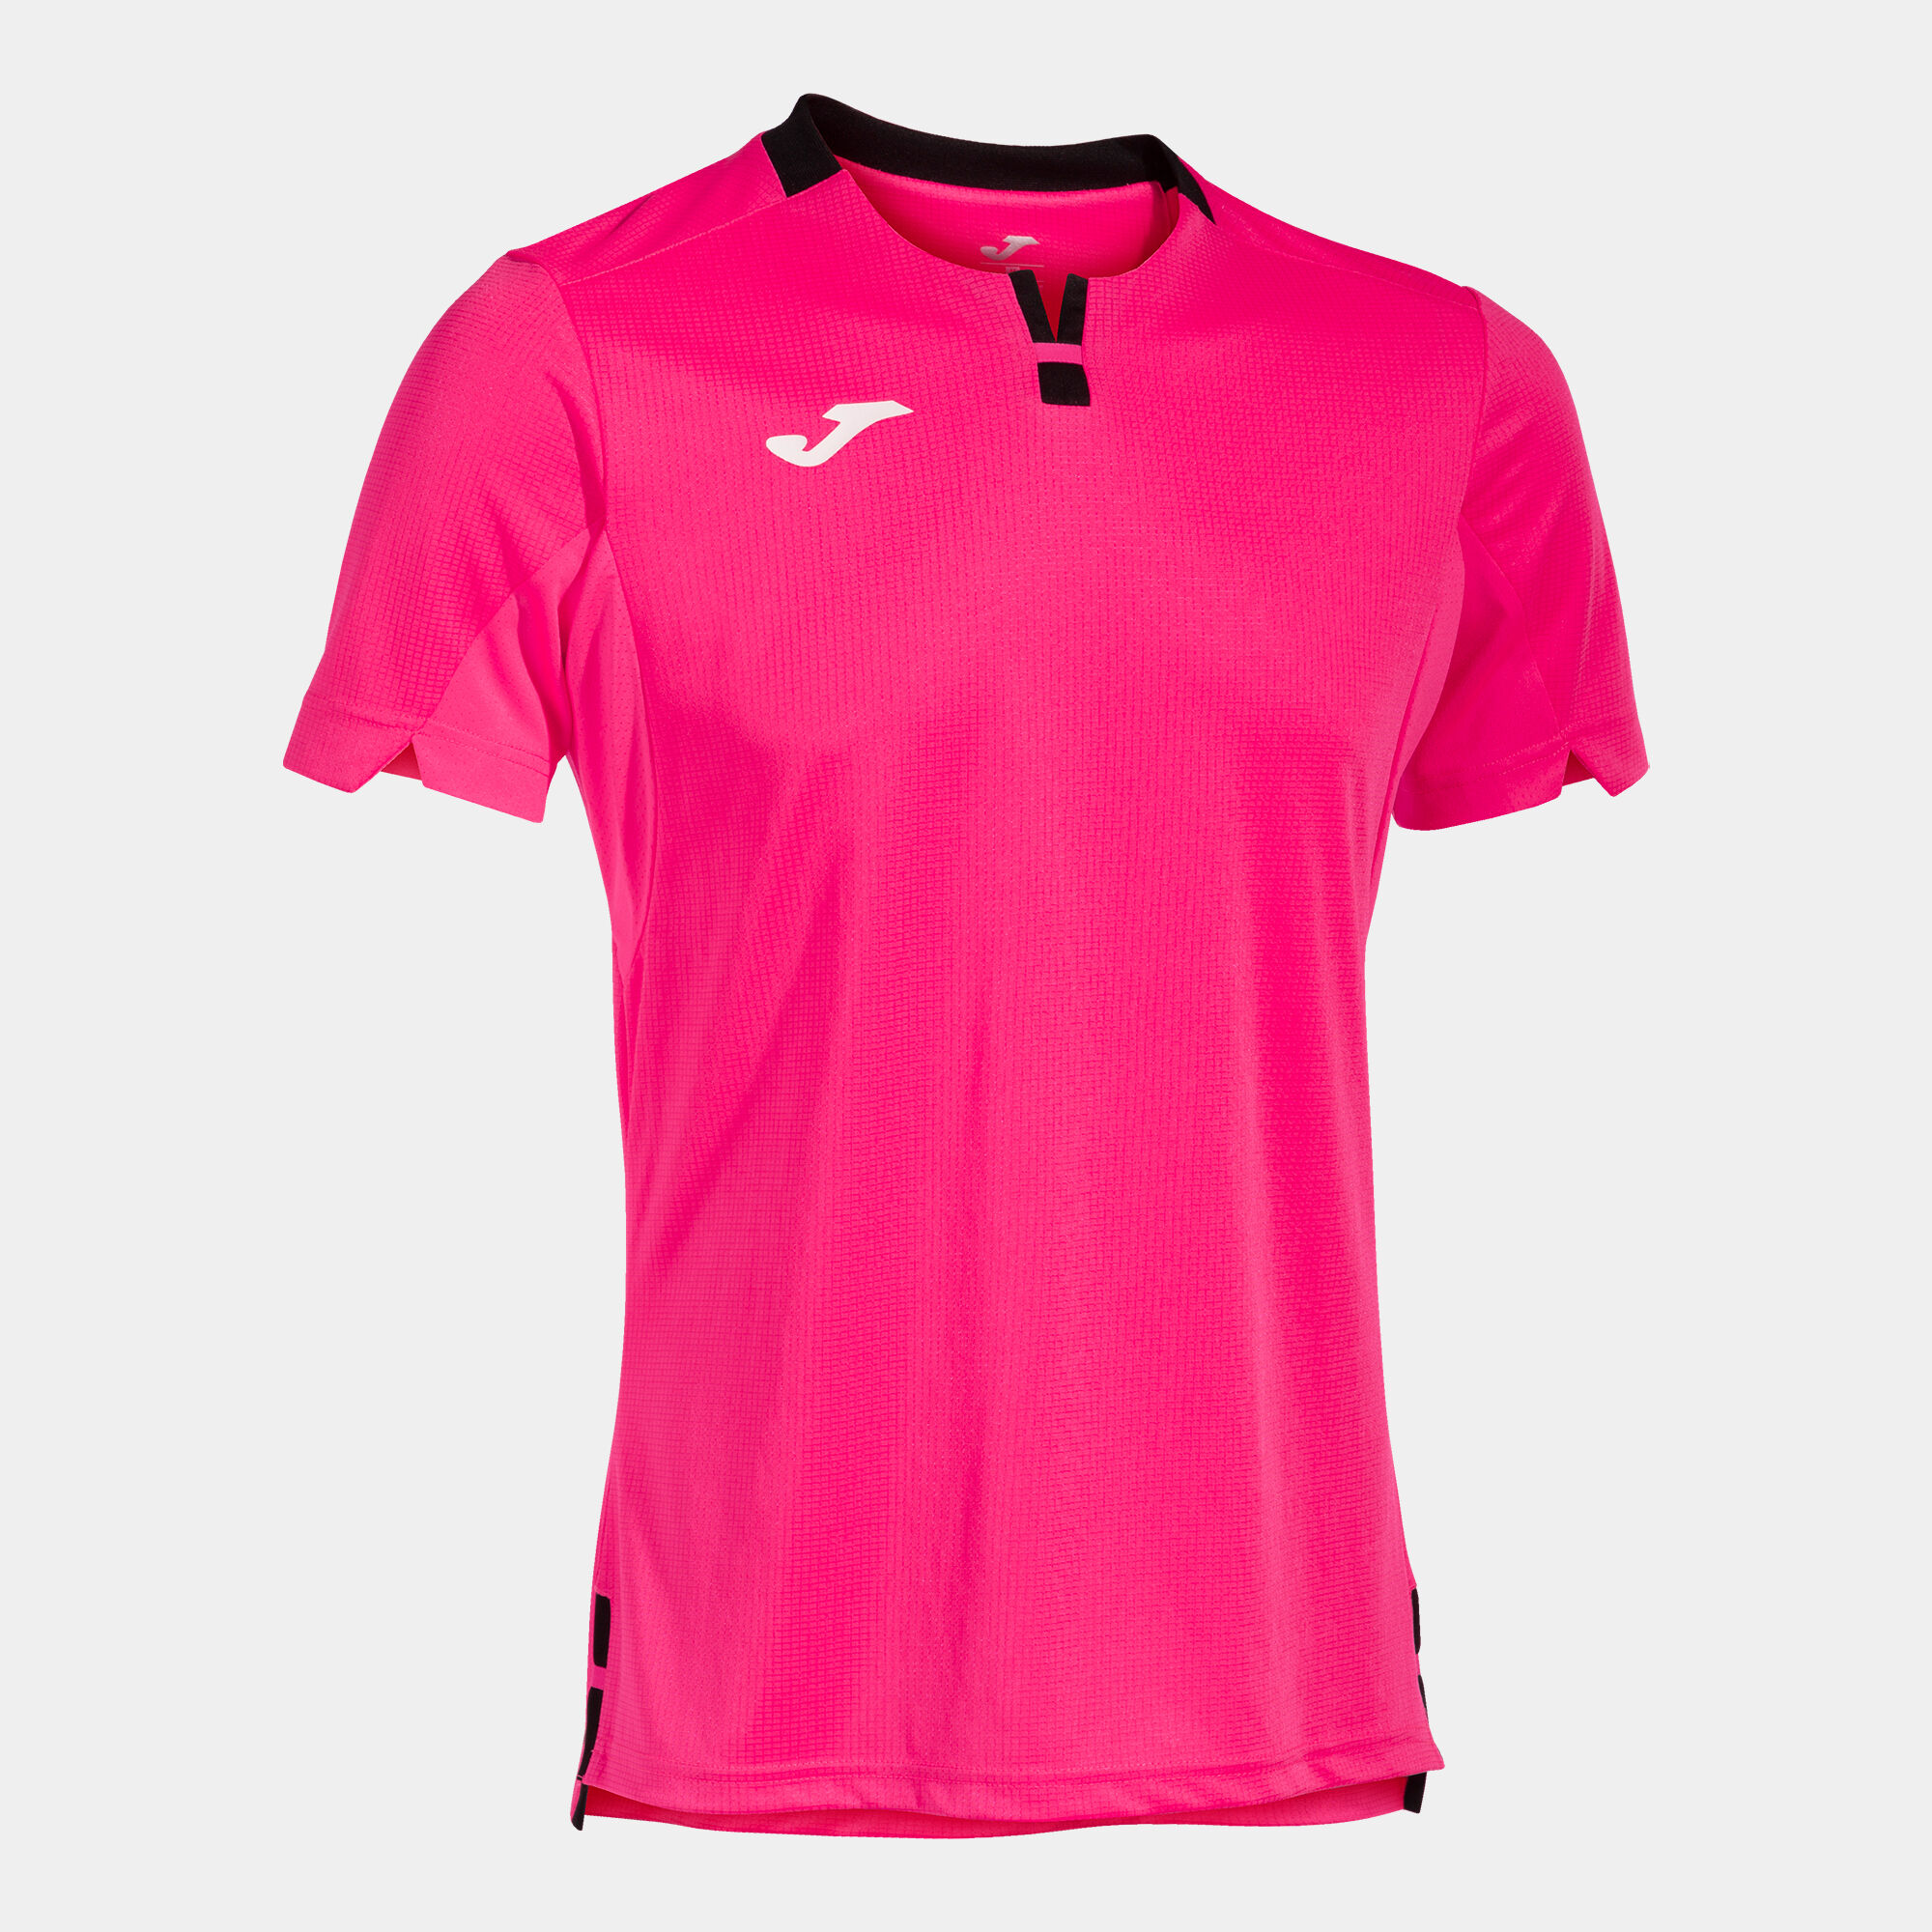 Maillot manches courtes homme Ranking rose fluo noir